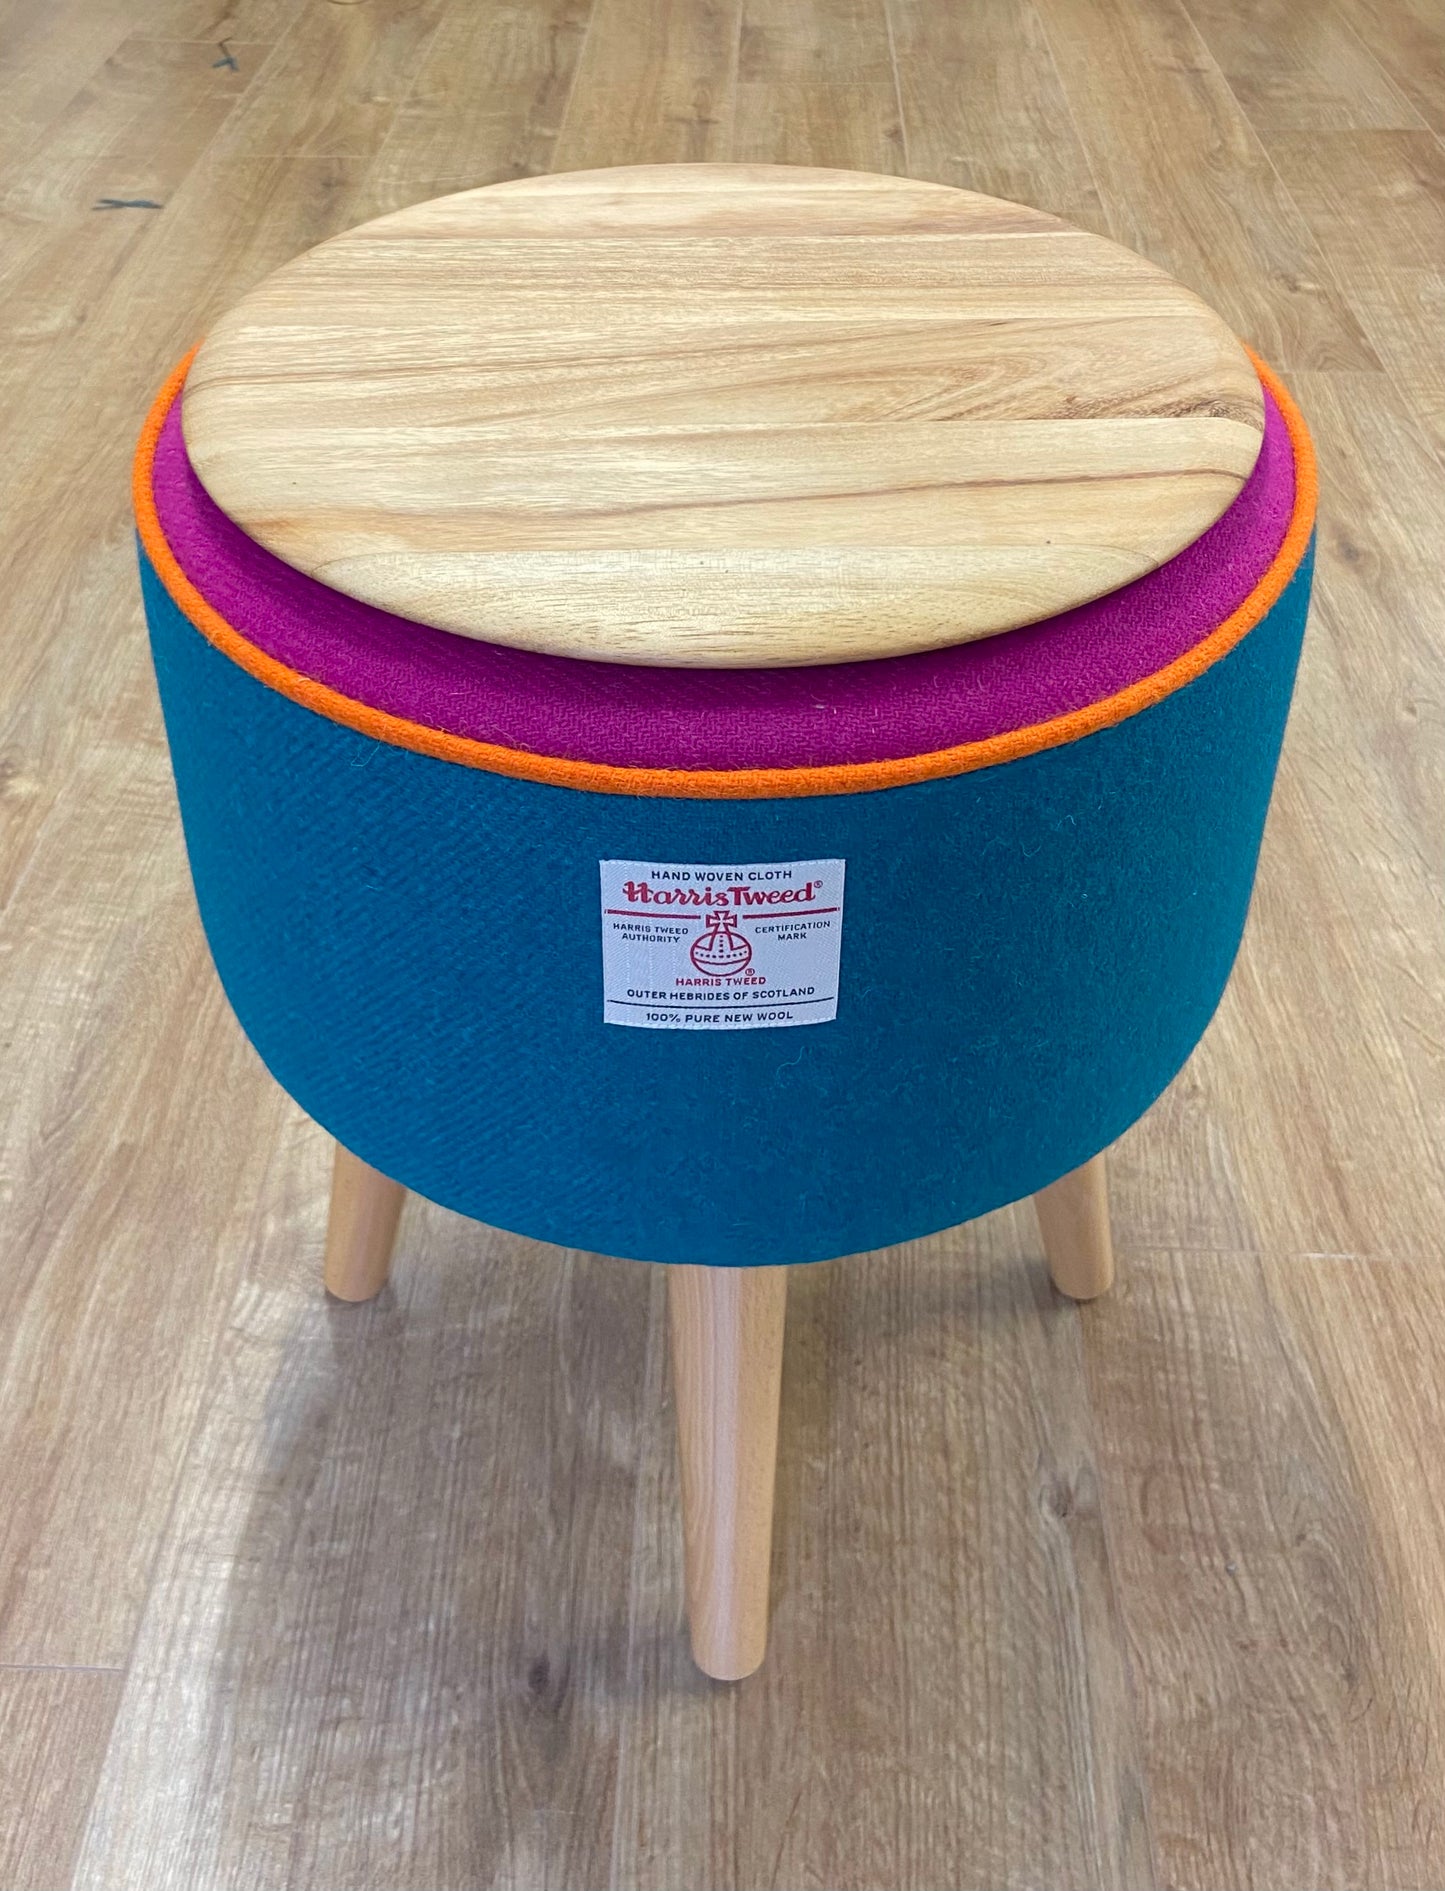 Rainbow End Table, Teal and Fuchsia Harris Tweed with Orange Piping and Removable Wooden Top